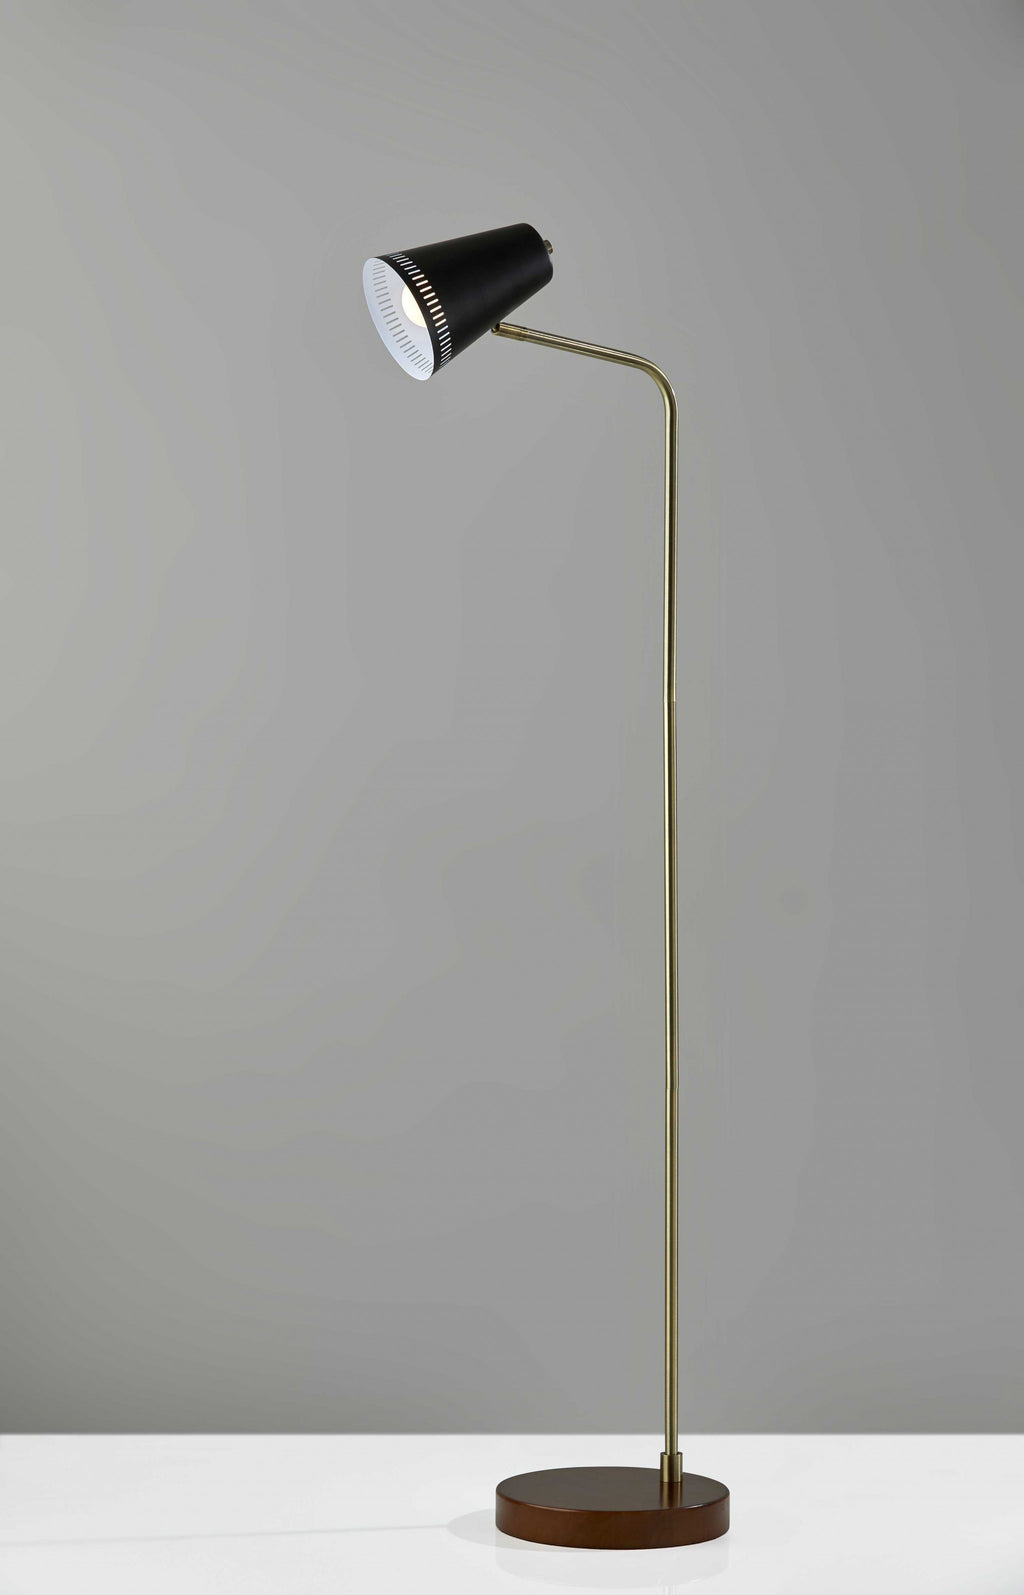 Brass Adjustable Floor Lamp with White Metal Vented Cone Shades - 99fab 